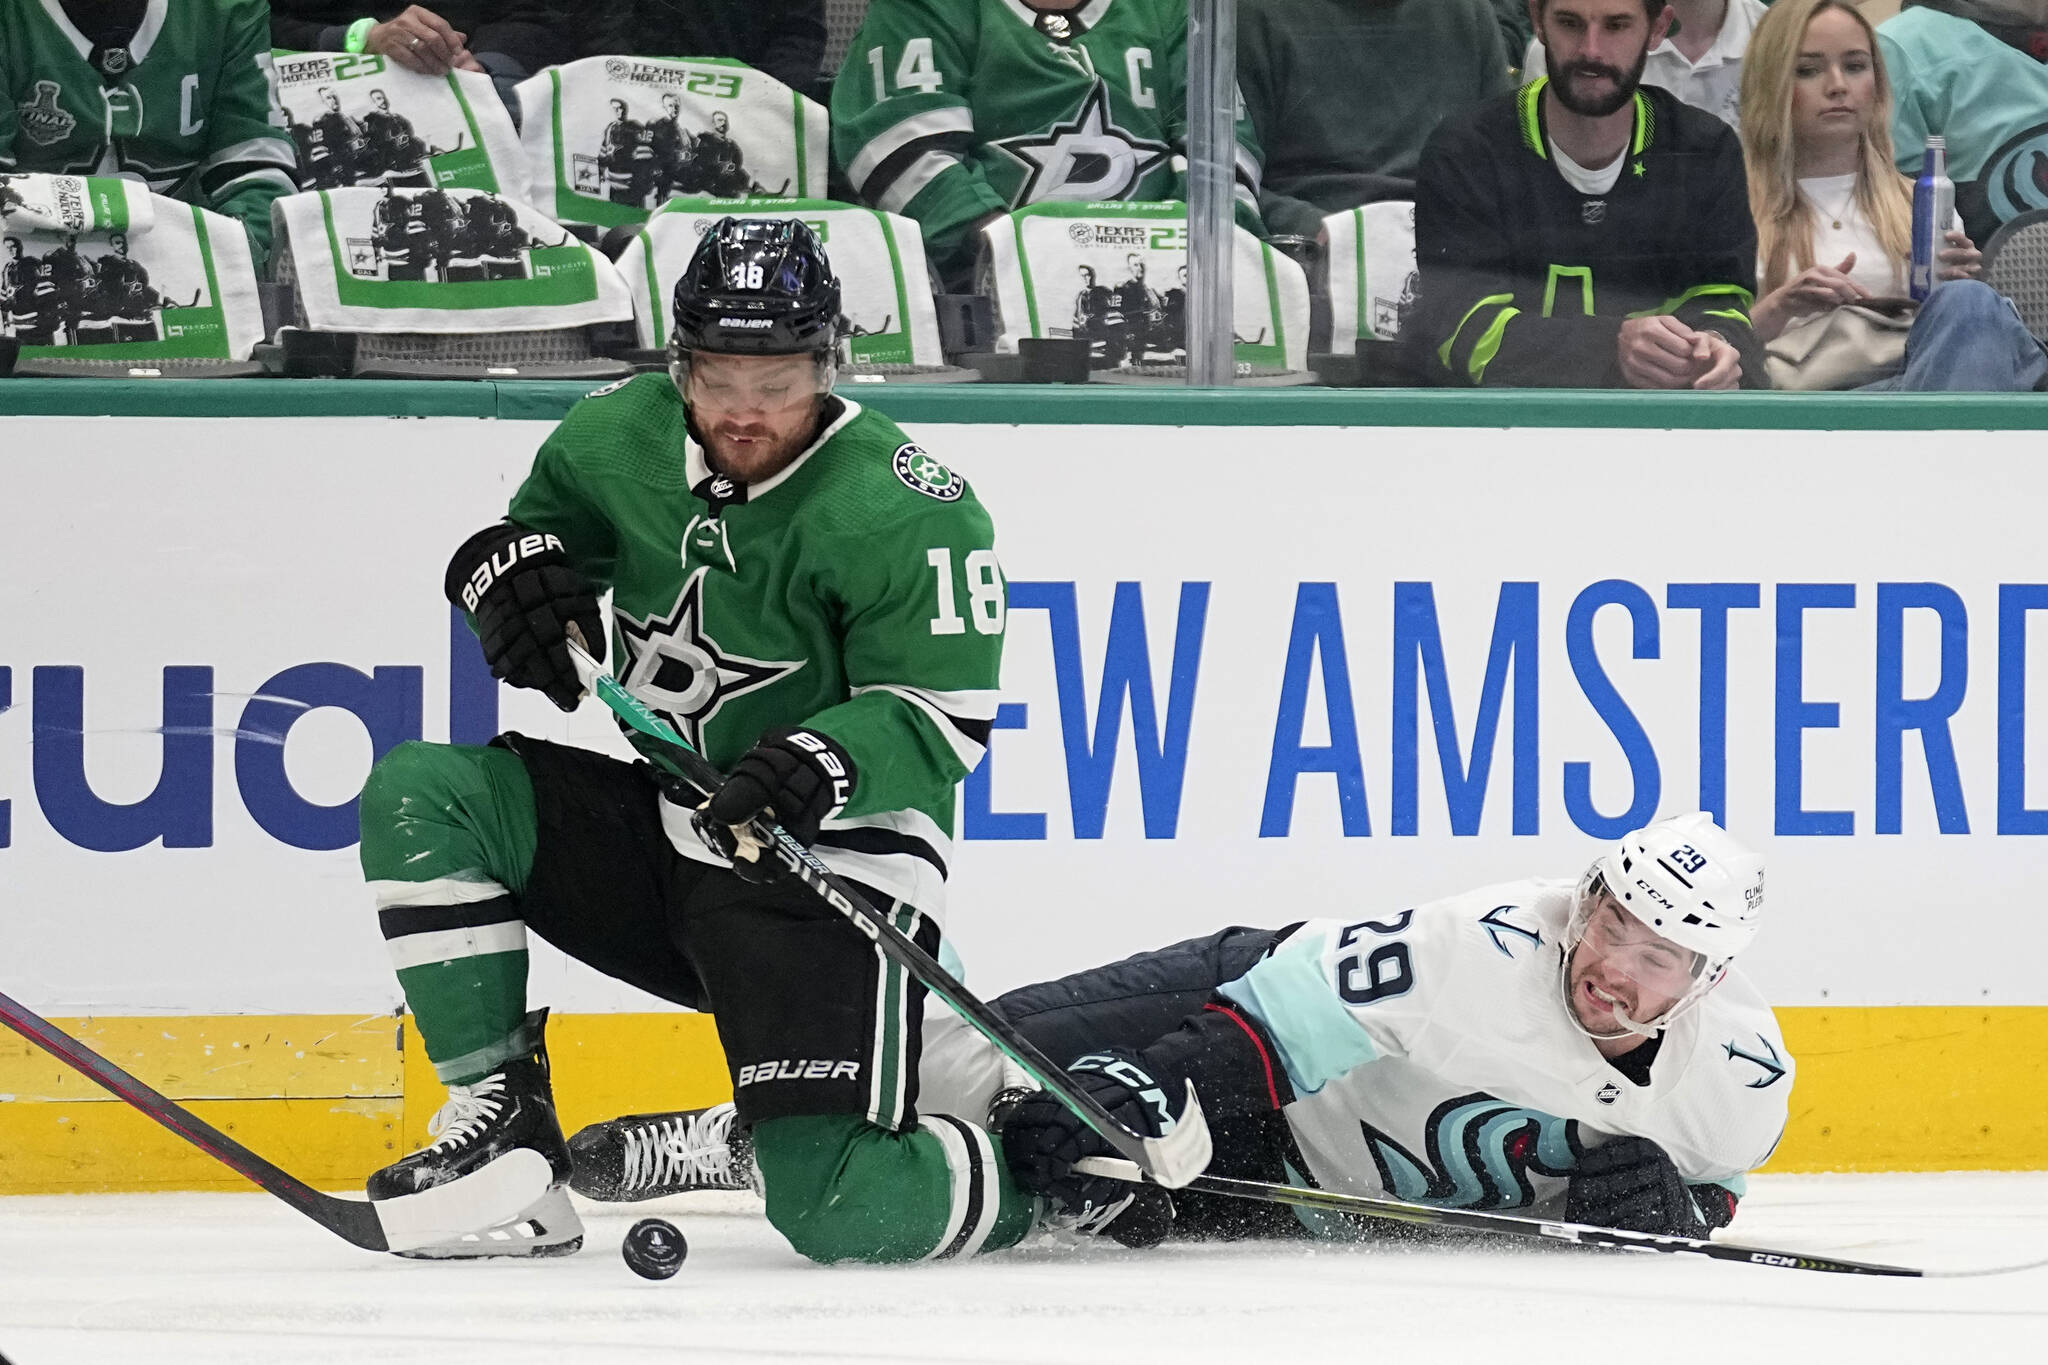 Stars center Max Domi (18) takes control of the puck in front of Kraken defenseman Vince Dunn during the first period of Game 7 of a second-round playoff series Monday in Dallas. (AP Photo/Tony Gutierrez)